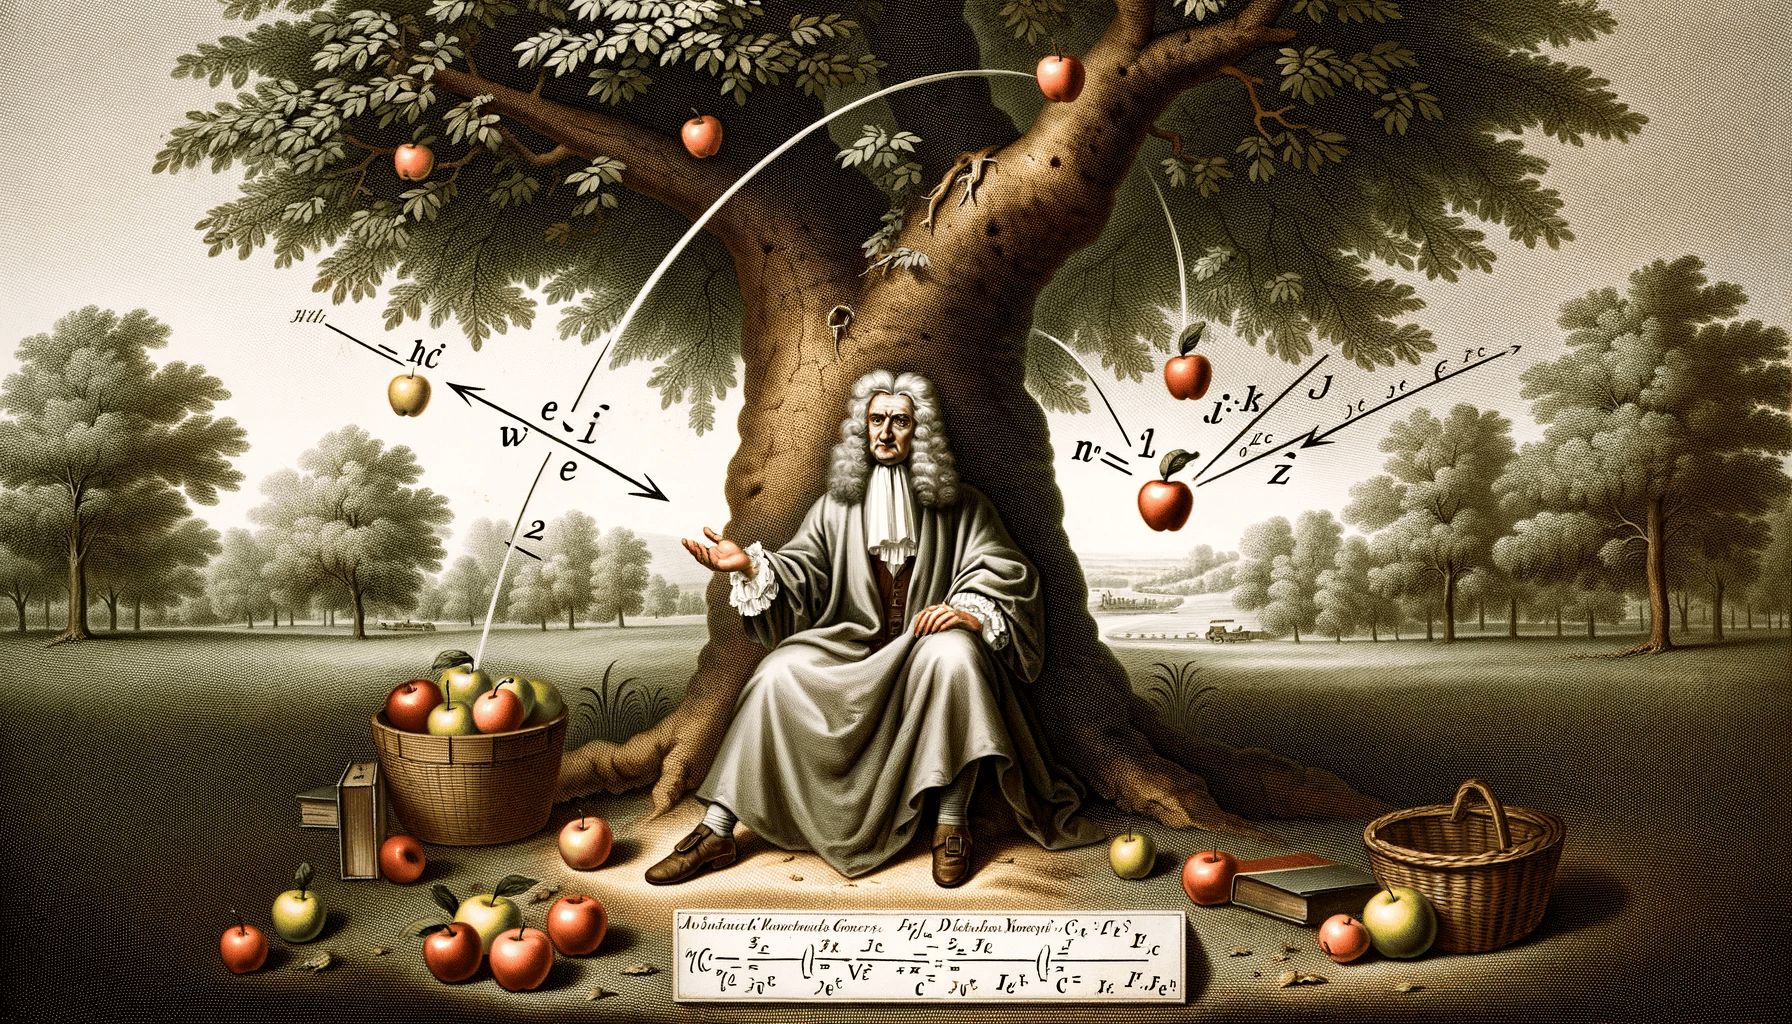 Illustration of Sir Isaac Newton sitting under a tree, observing an apple falling, with arrows indicating forces and labeled equations nearby